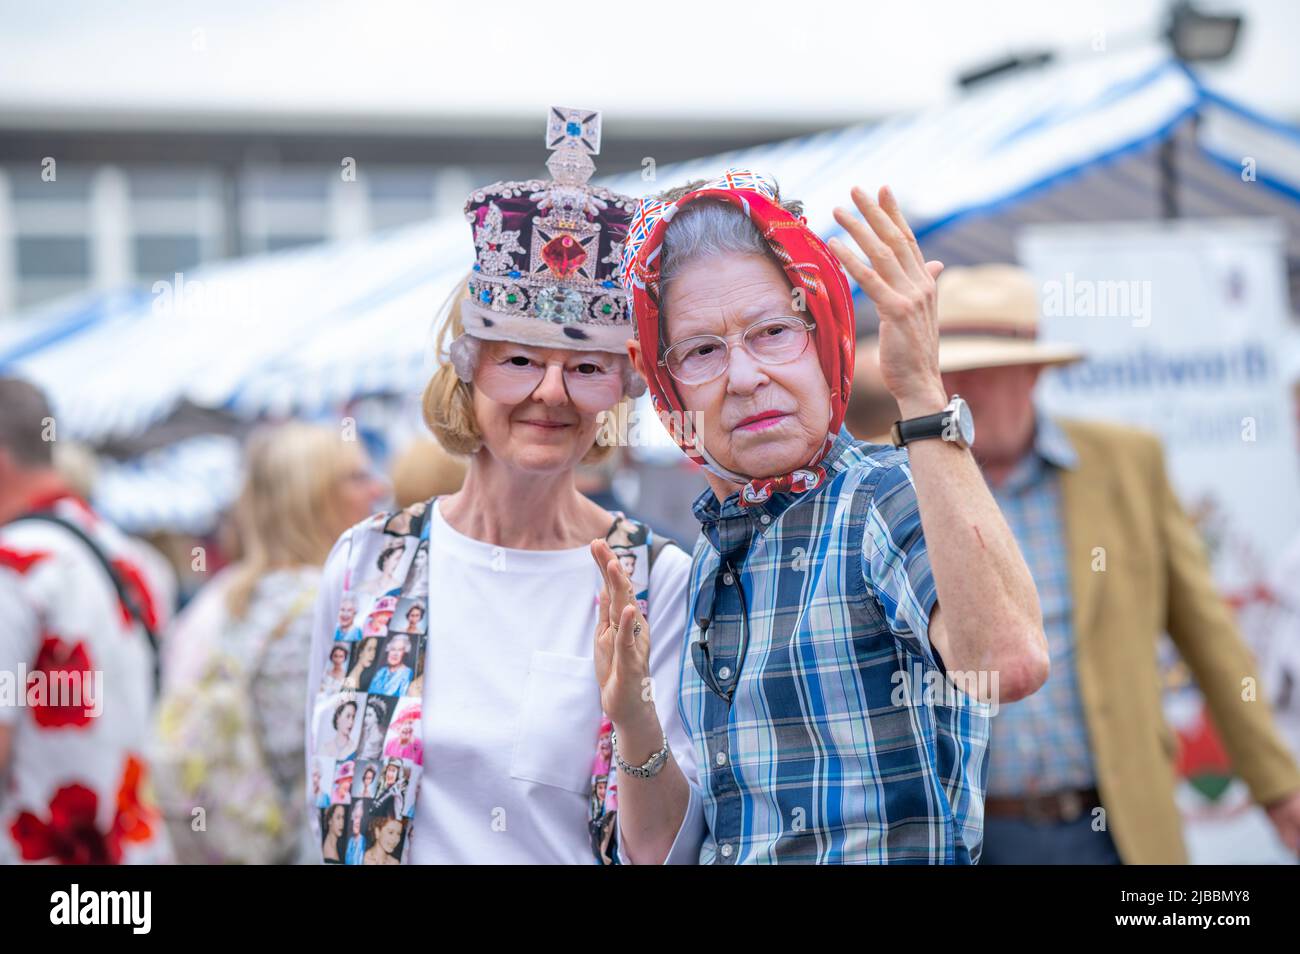 Two revellers wearing cardboard masks of the Queen. Platinum Jubilee celebrations in Kenilworth, Warwickshire. Thousands of locals enjoyed the main road closure, to sit on picnic tables and celebrate the Queen's 70th anniversary of her reign. Stock Photo